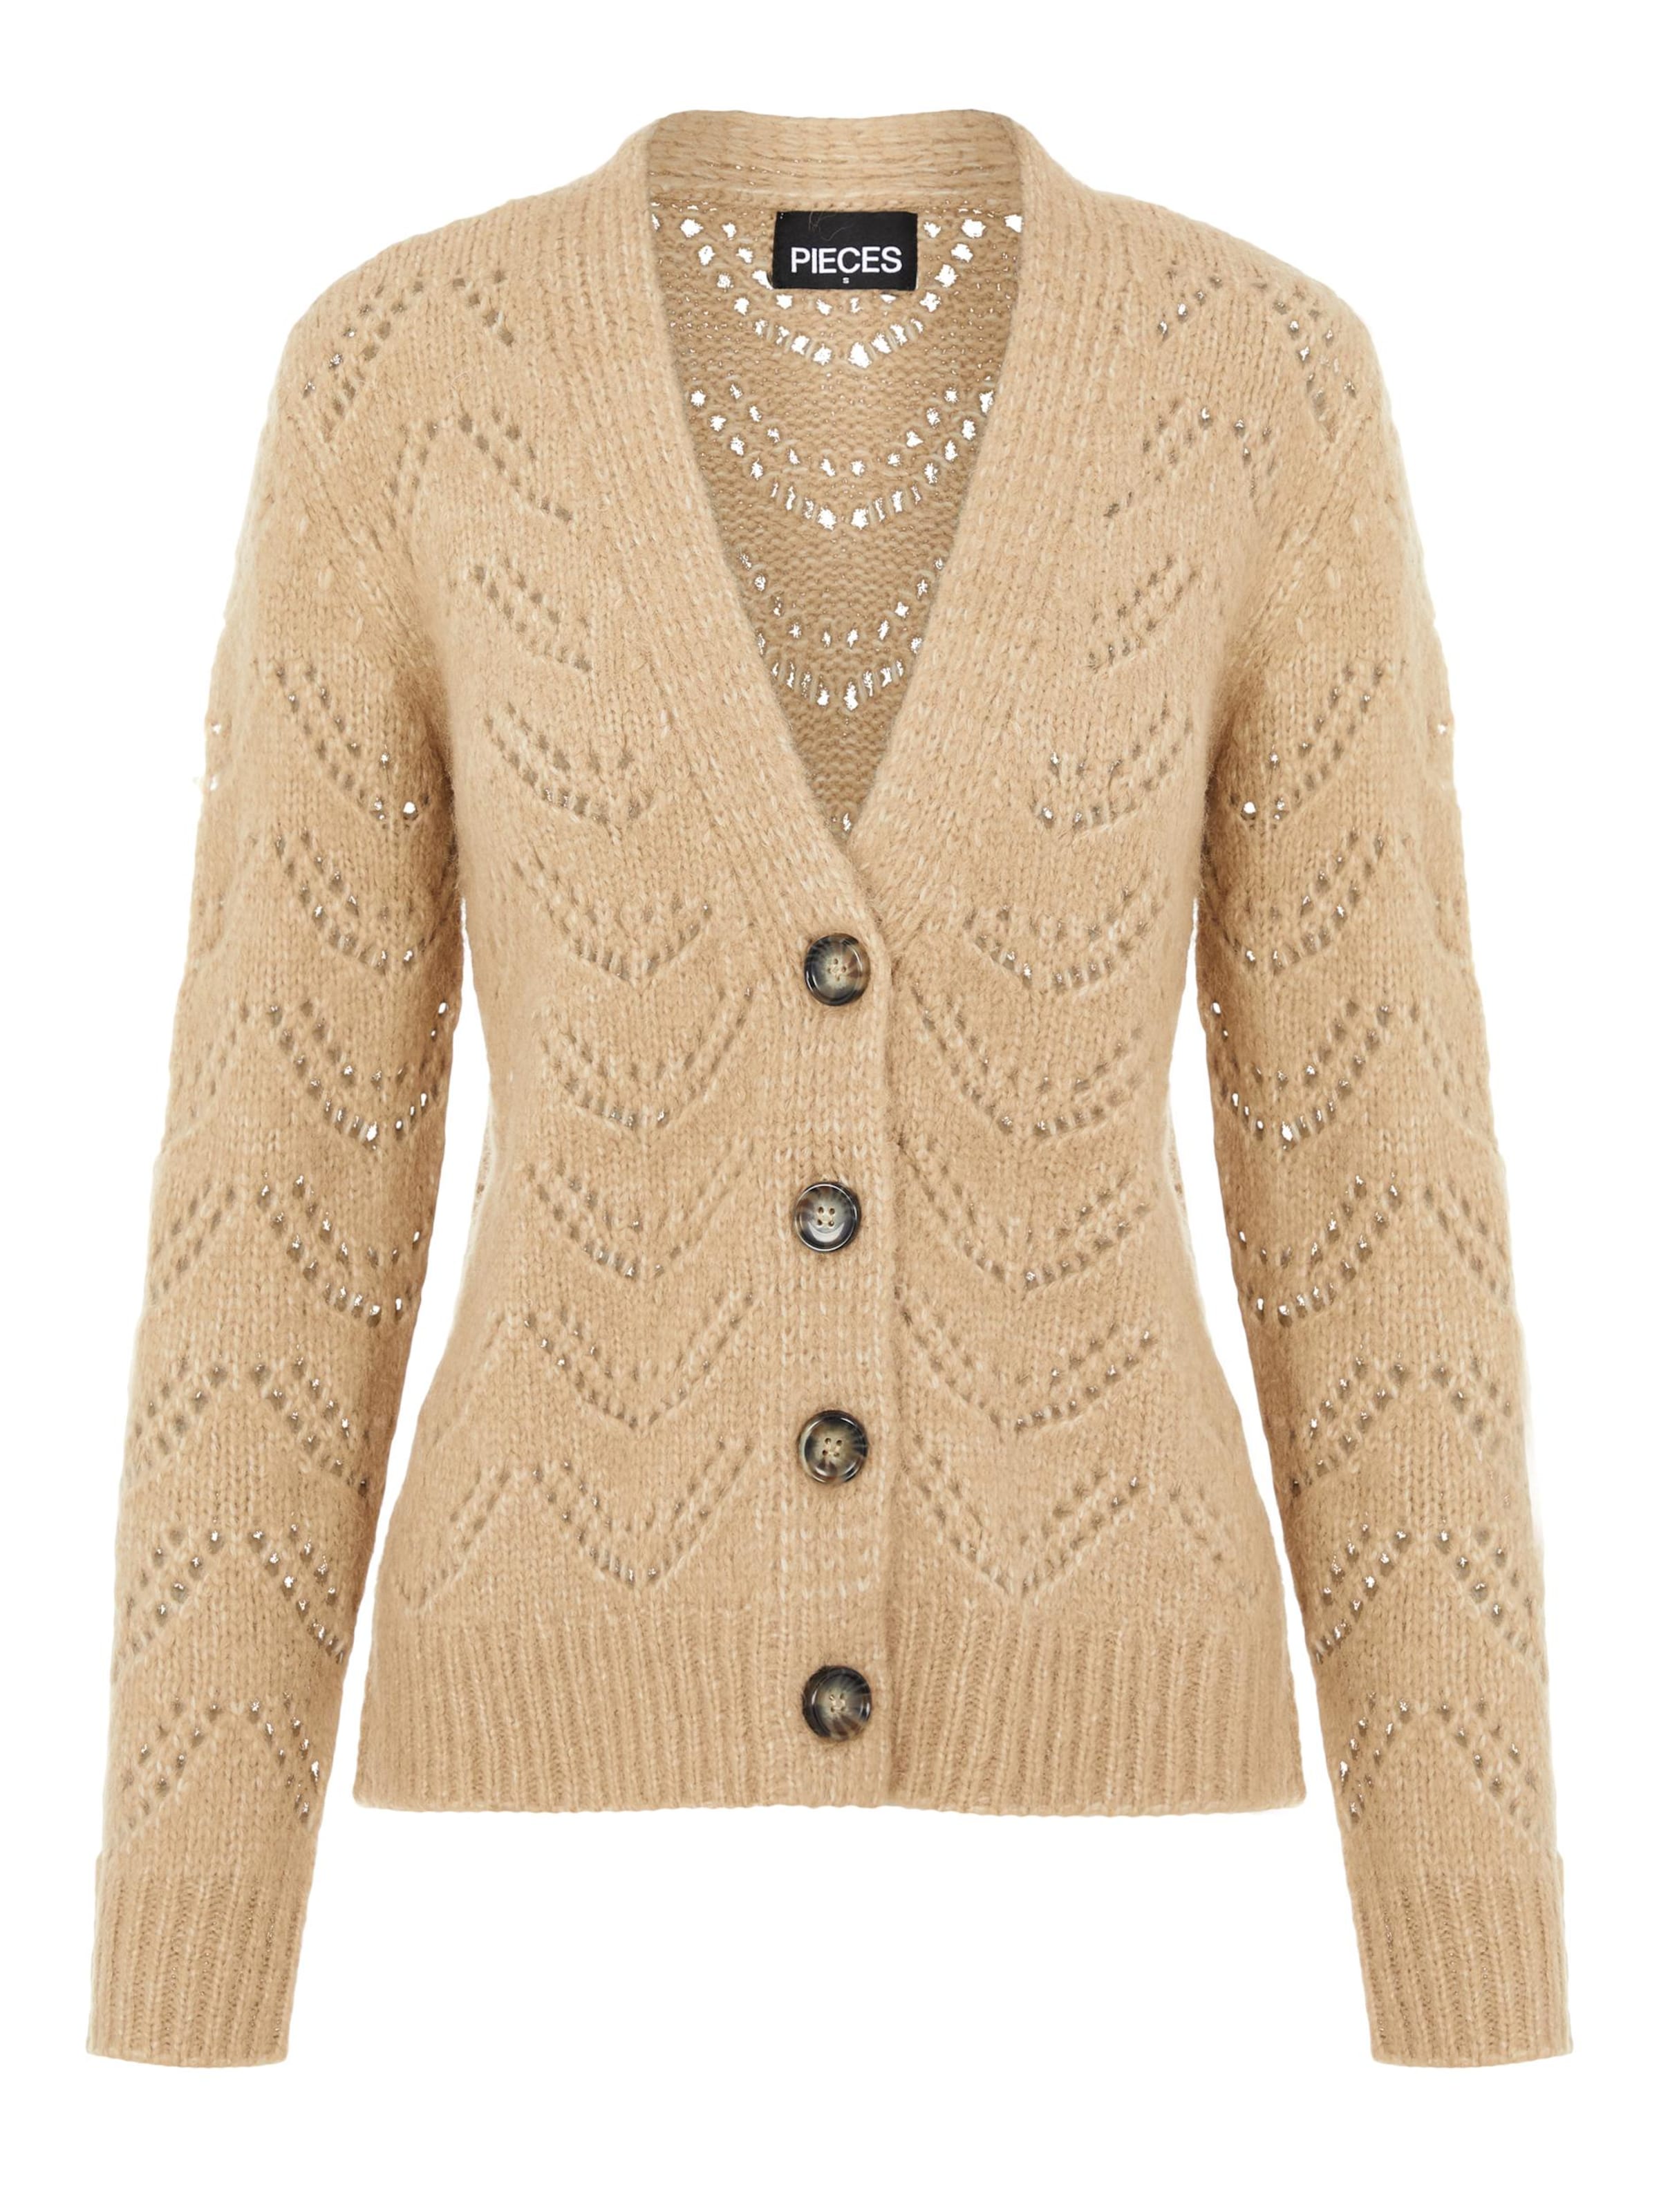 PIECES Knit Cardigan 'Bibi' in Light Brown | ABOUT YOU